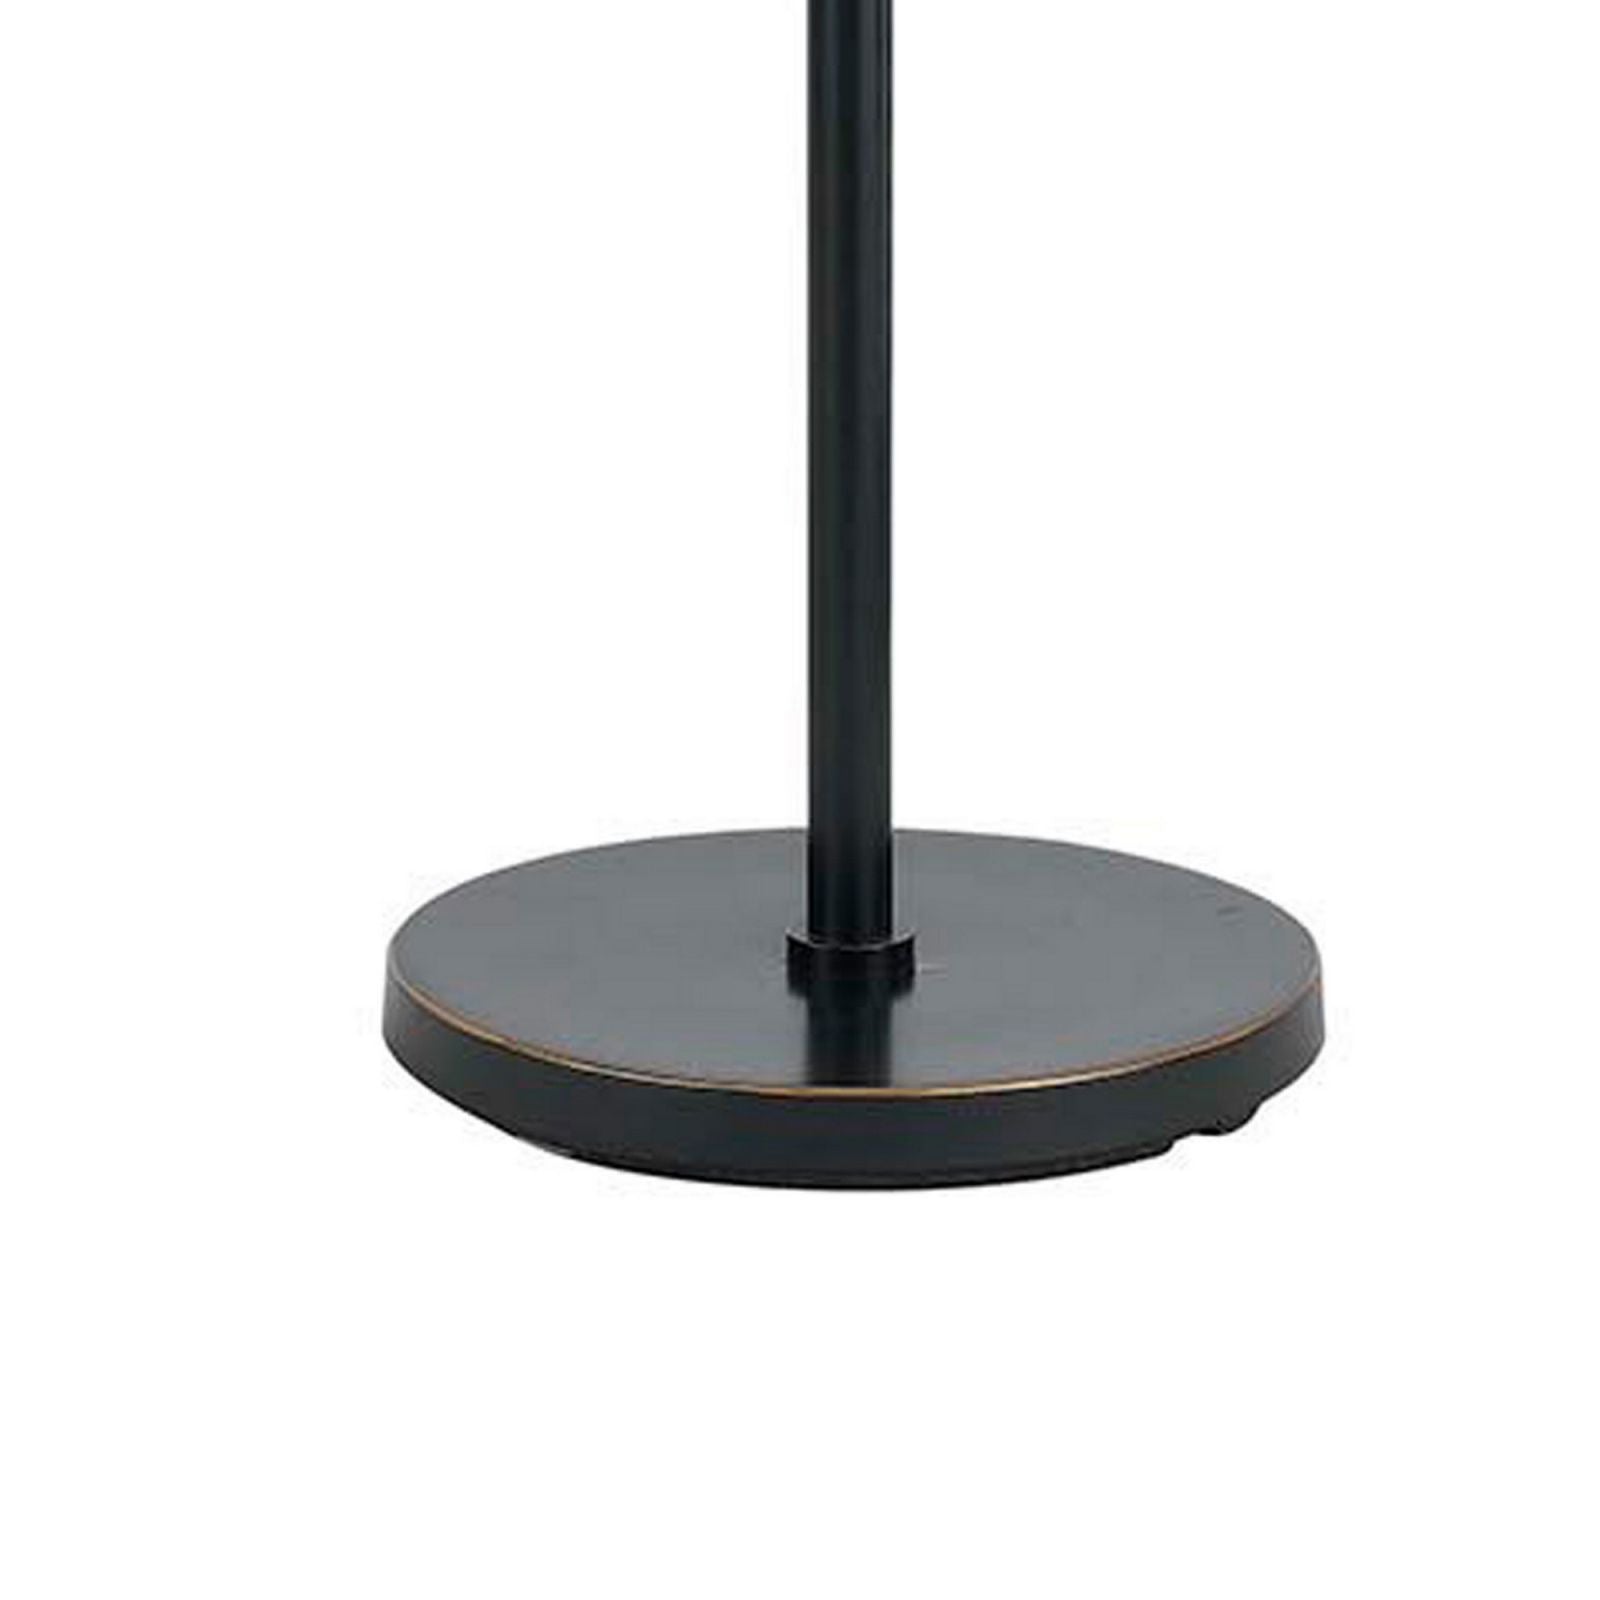 Metal Body Floor Lamp With Fabric Drum Shade And Pull Chain Switch, Black By Benzara